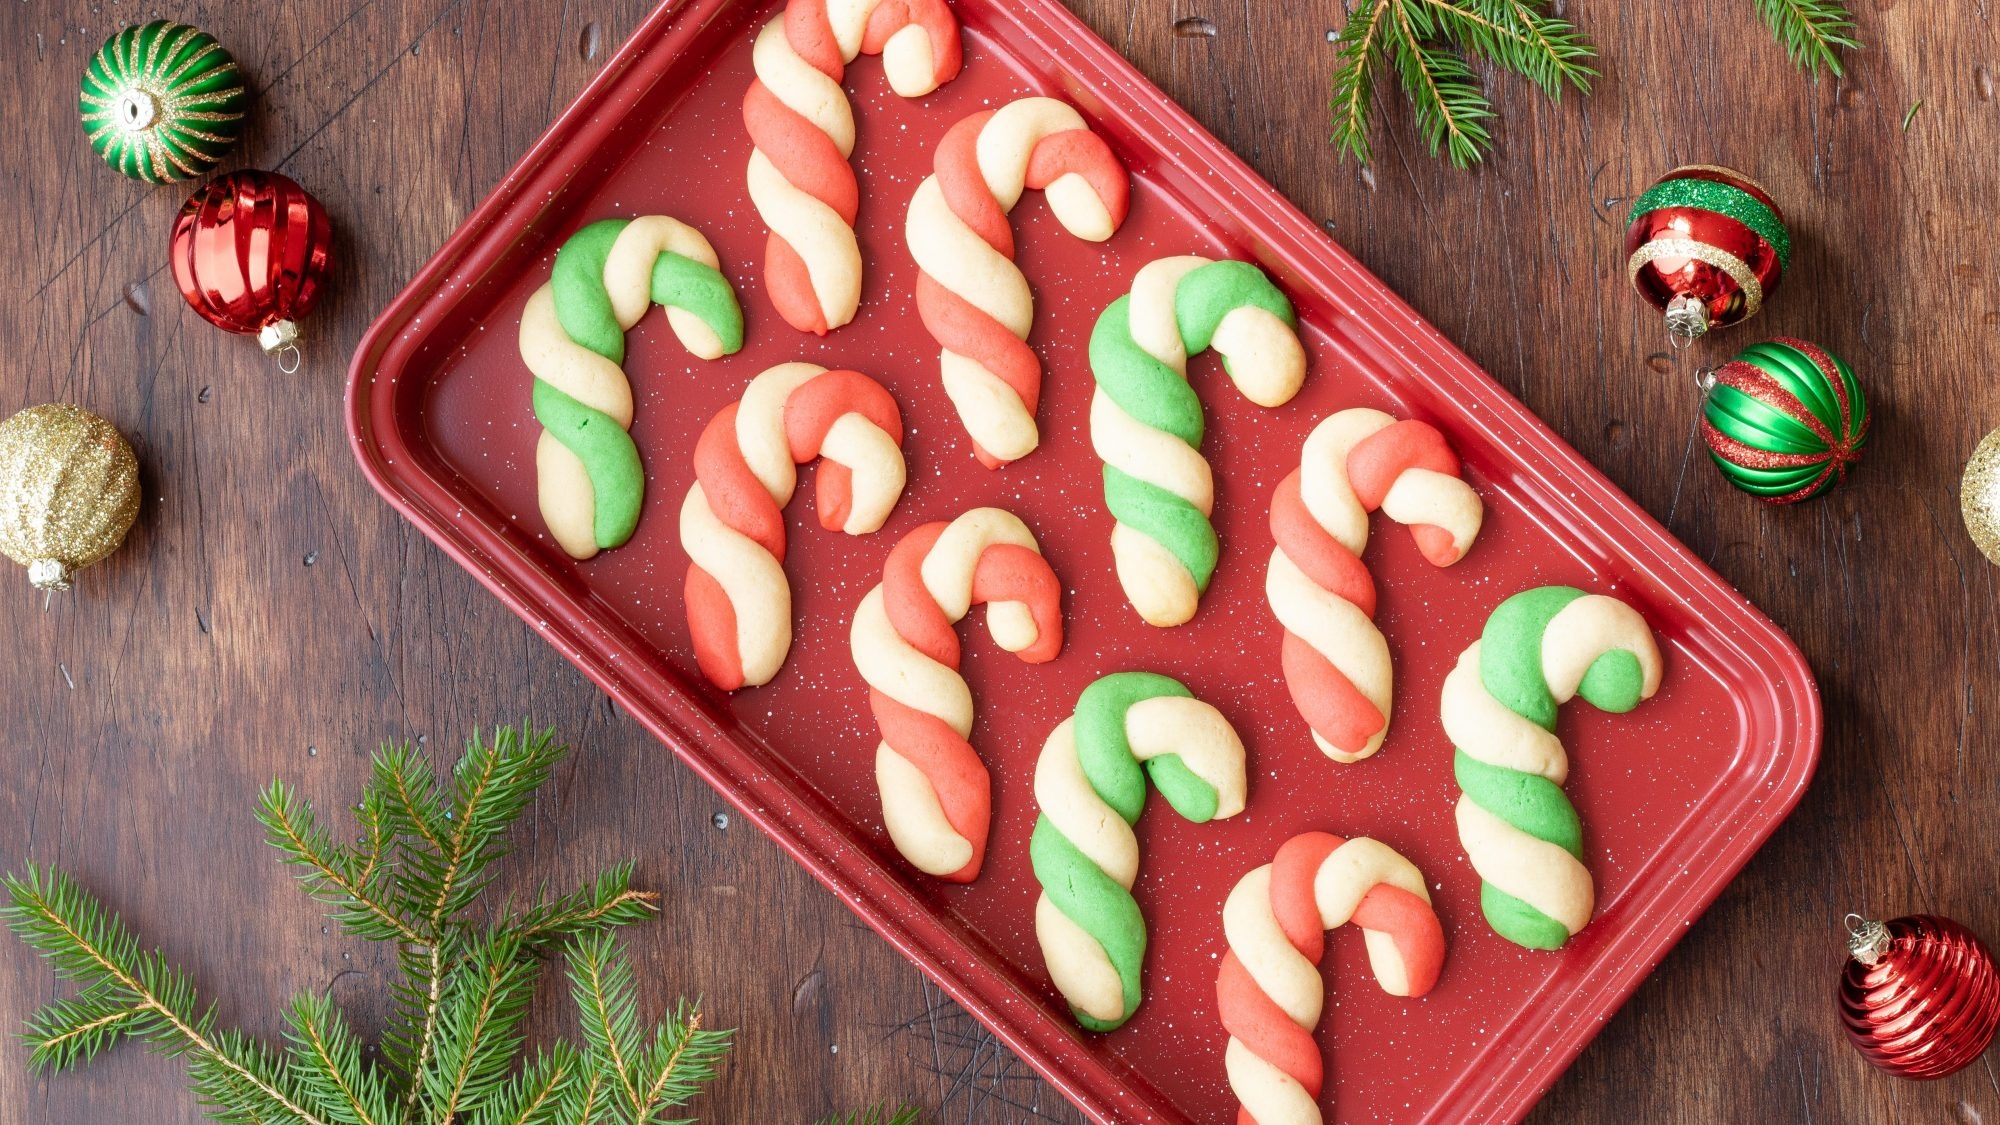 Candy cane cookies, Southern living recipe, Festive sweets, Delicious holiday treats, 2000x1130 HD Desktop